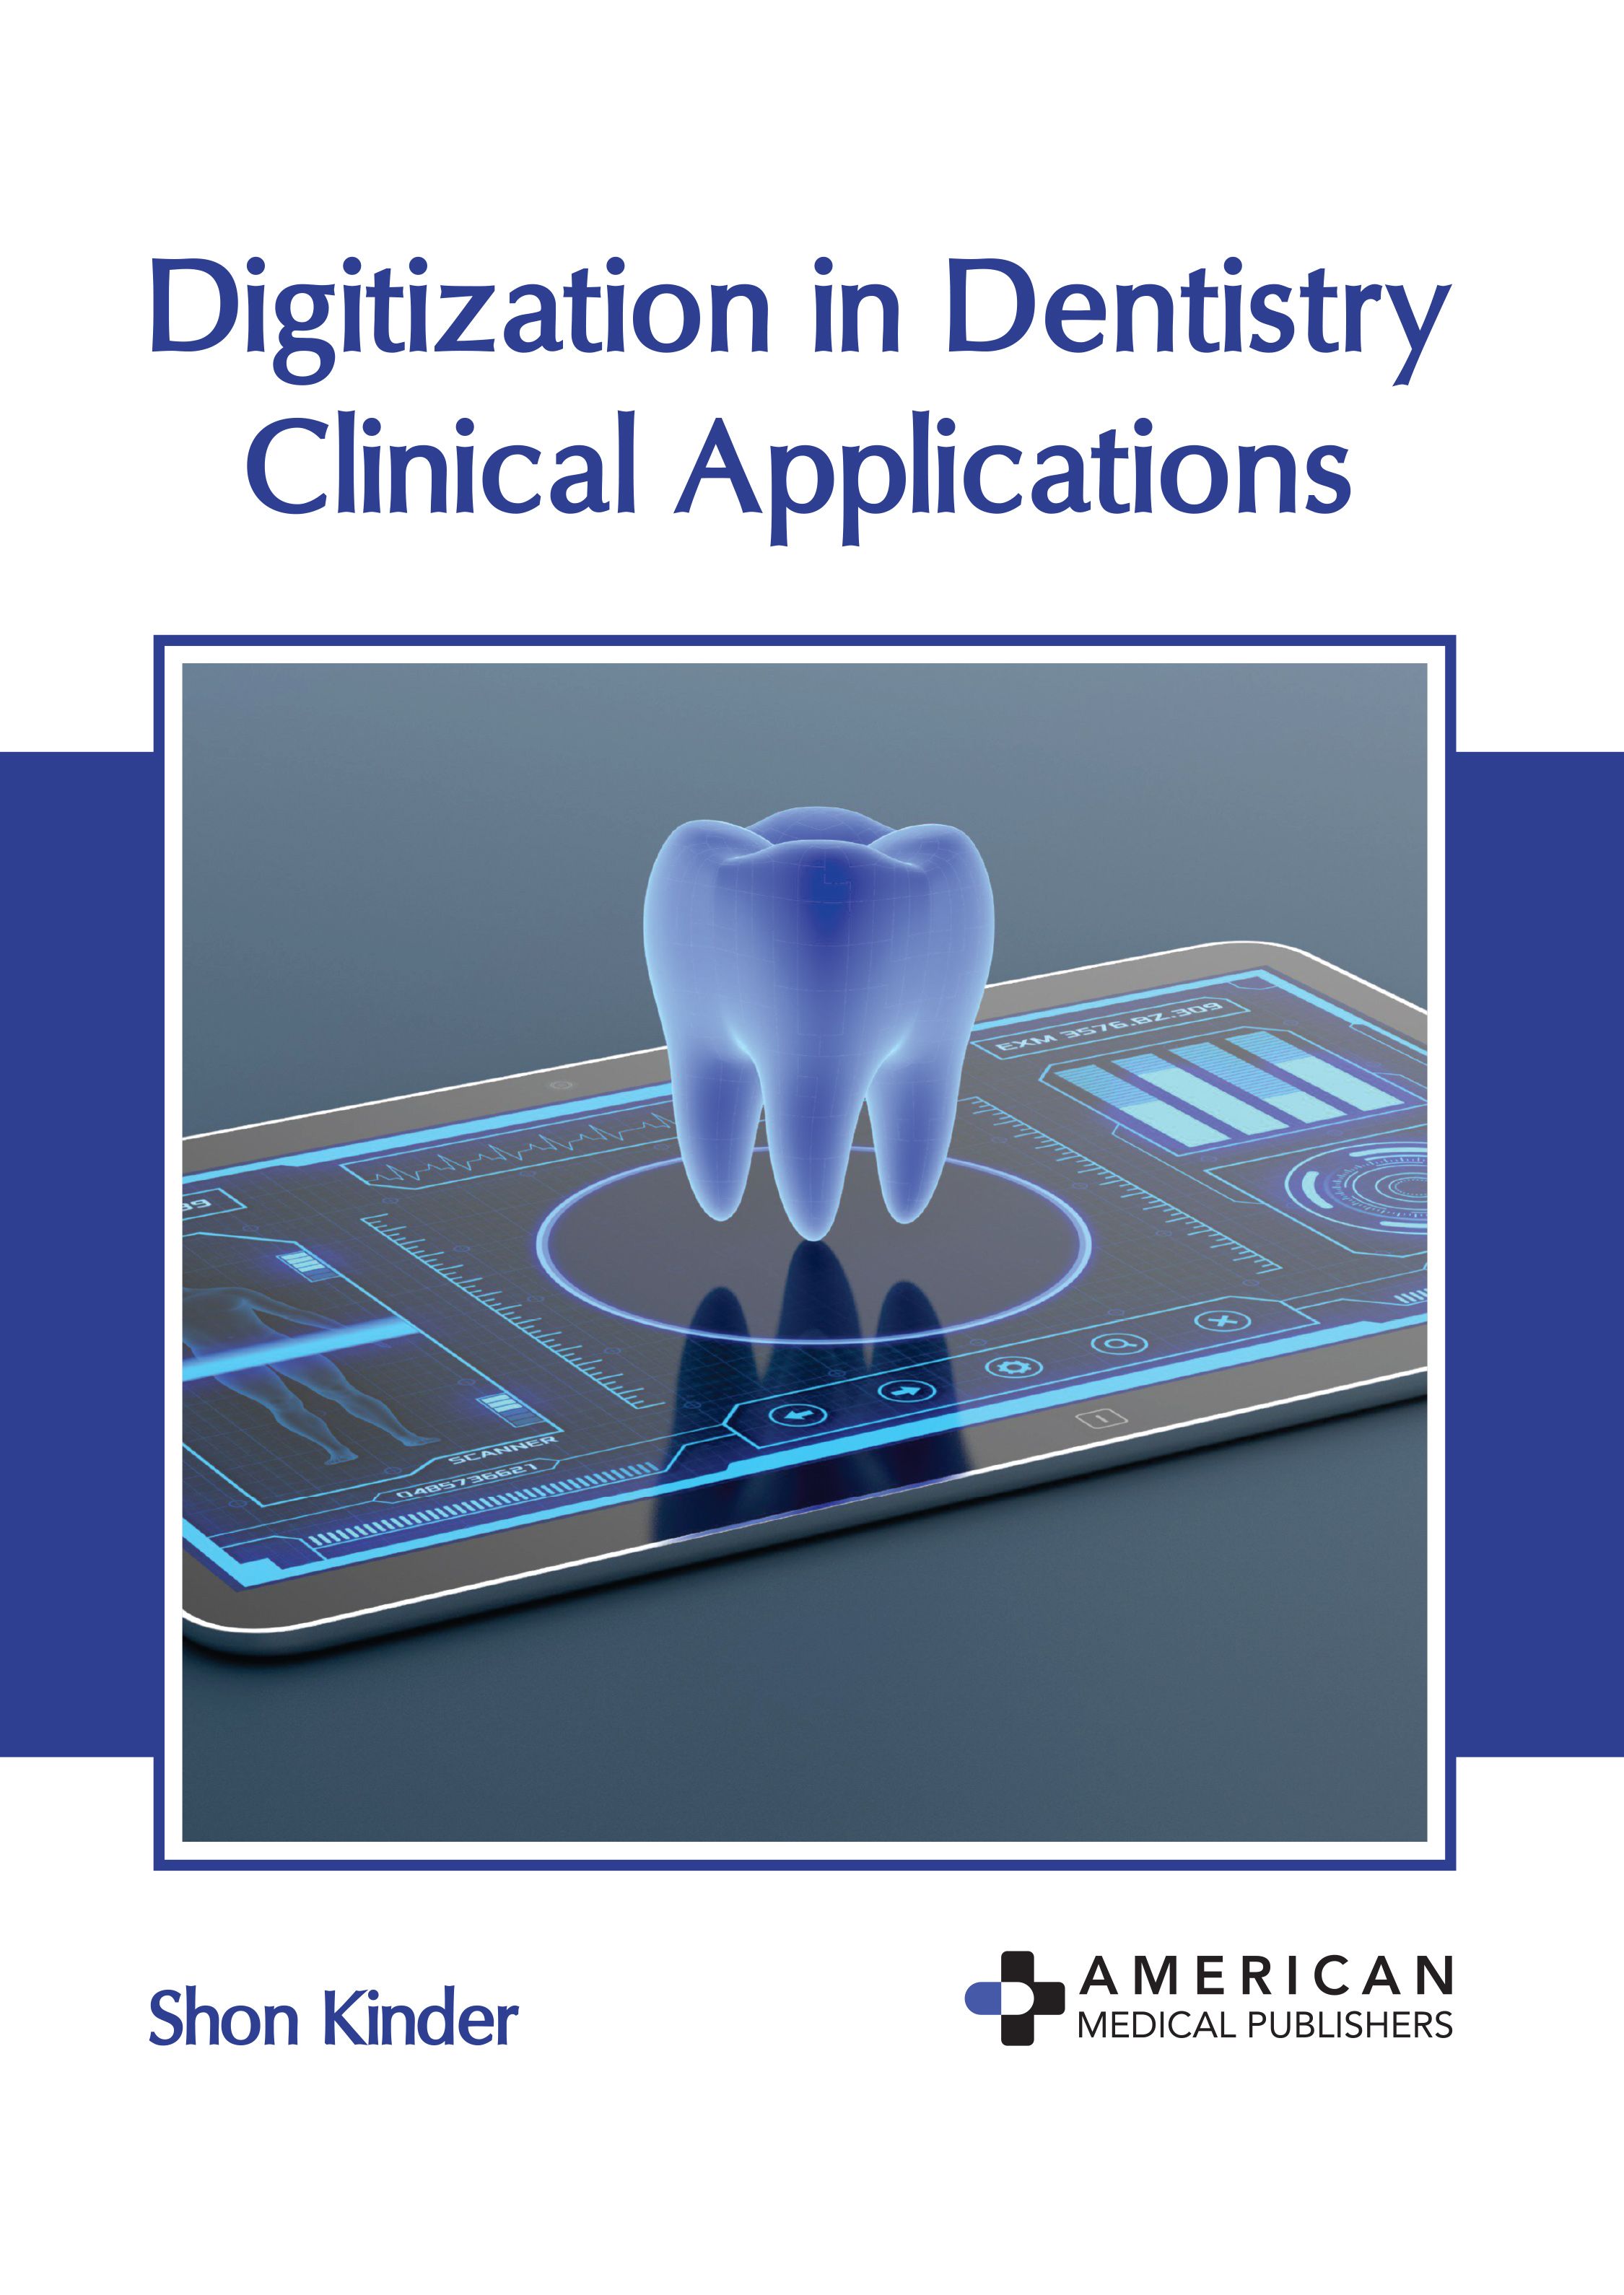 DIGITIZATION IN DENTISTRY: CLINICAL APPLICATIONS